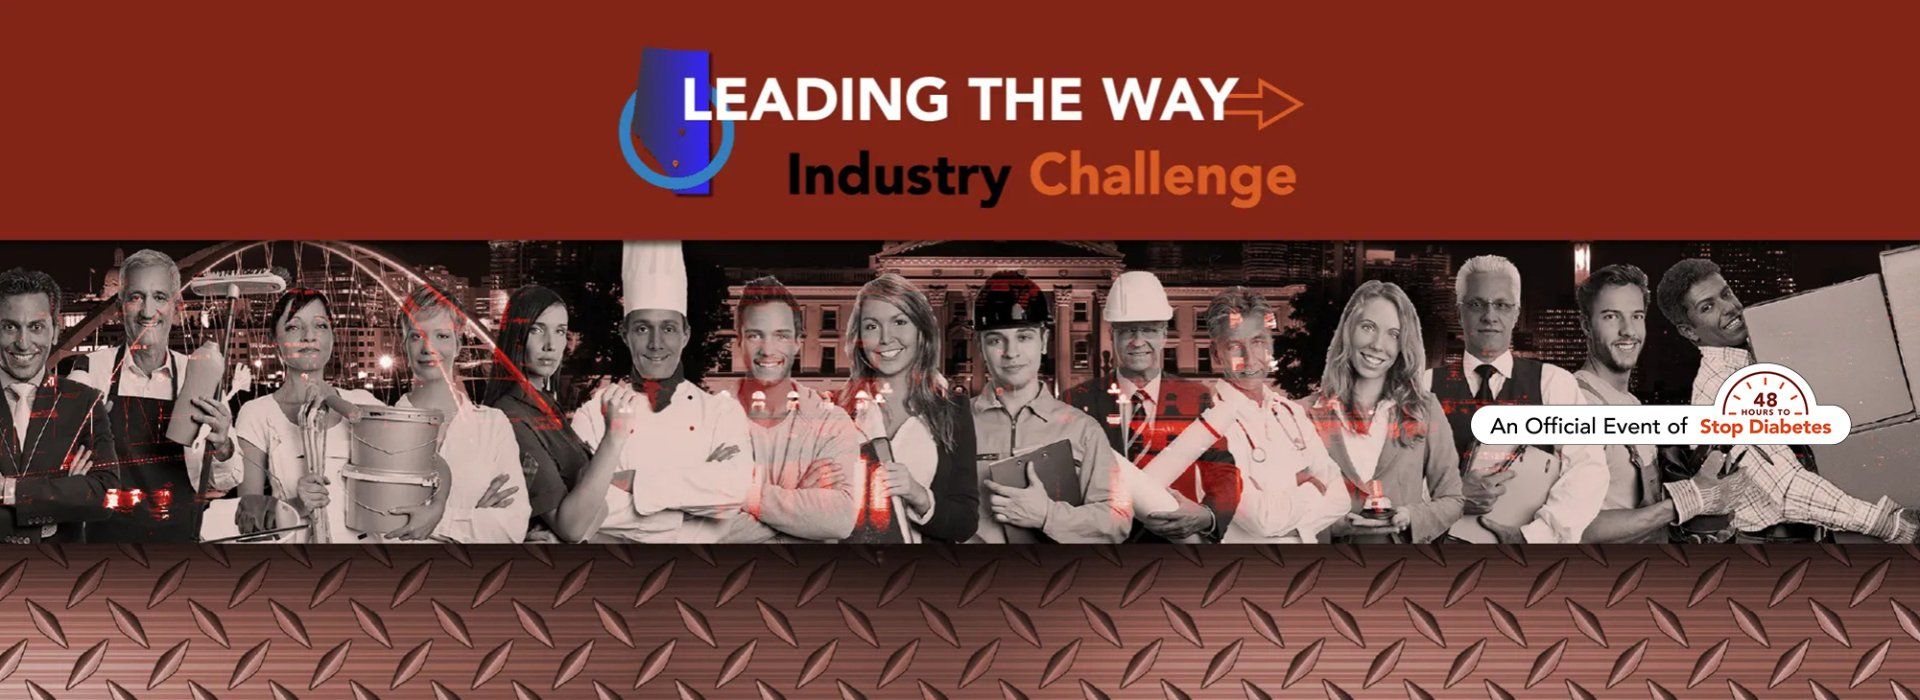 Leading the Way Industry Challenge